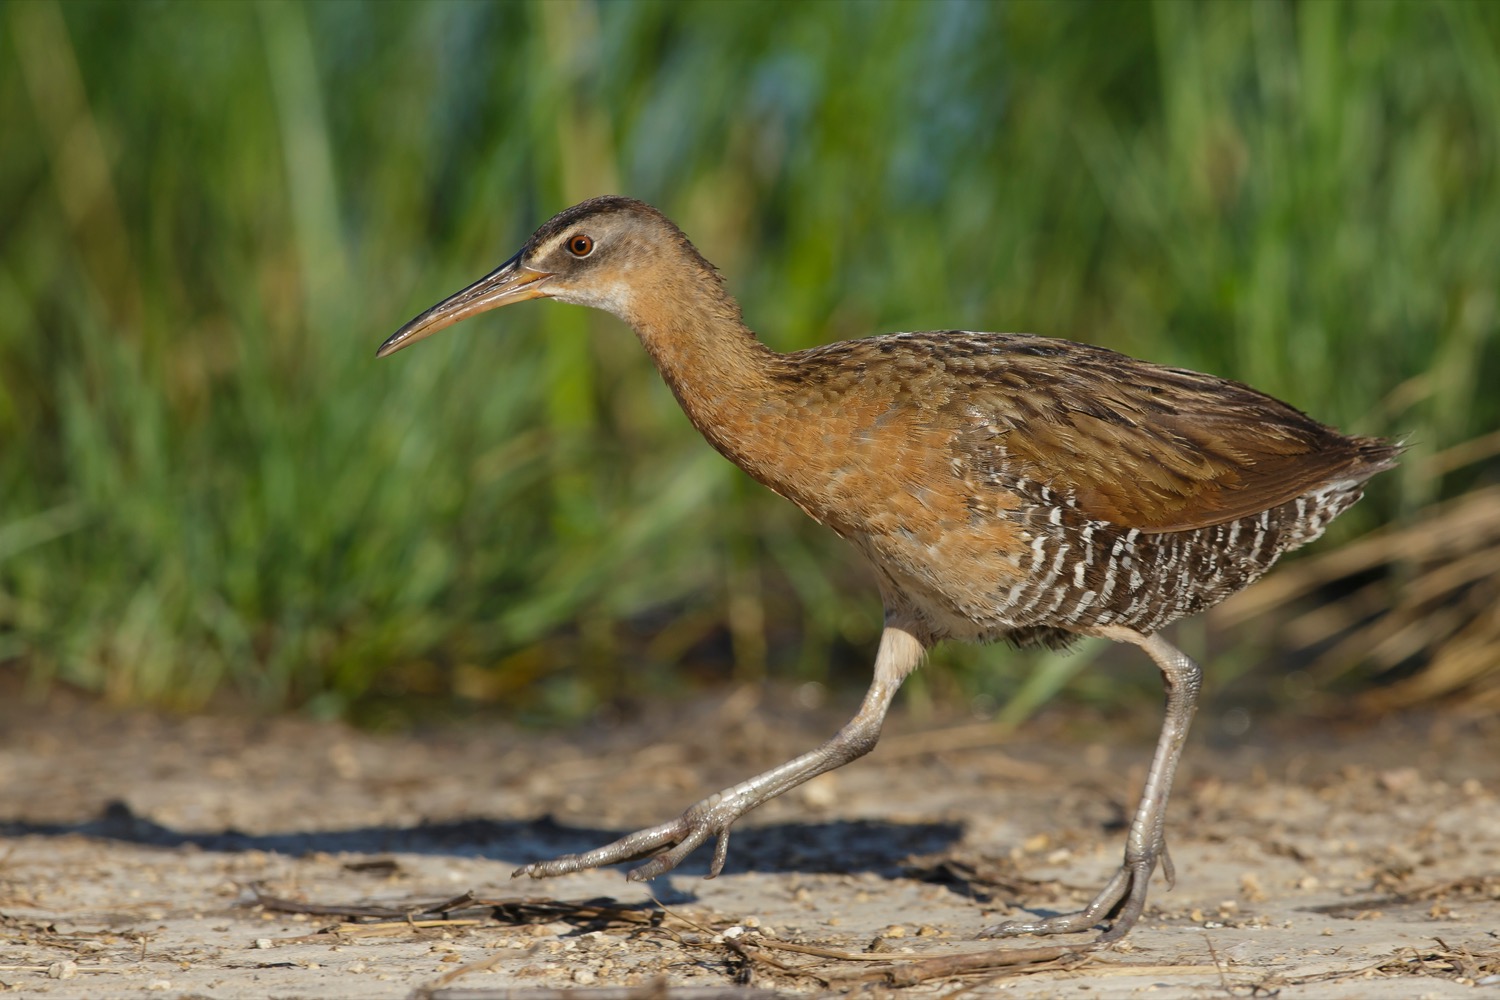 a brownish bird with a longer than average neck walks on the ground with tall grass behind it